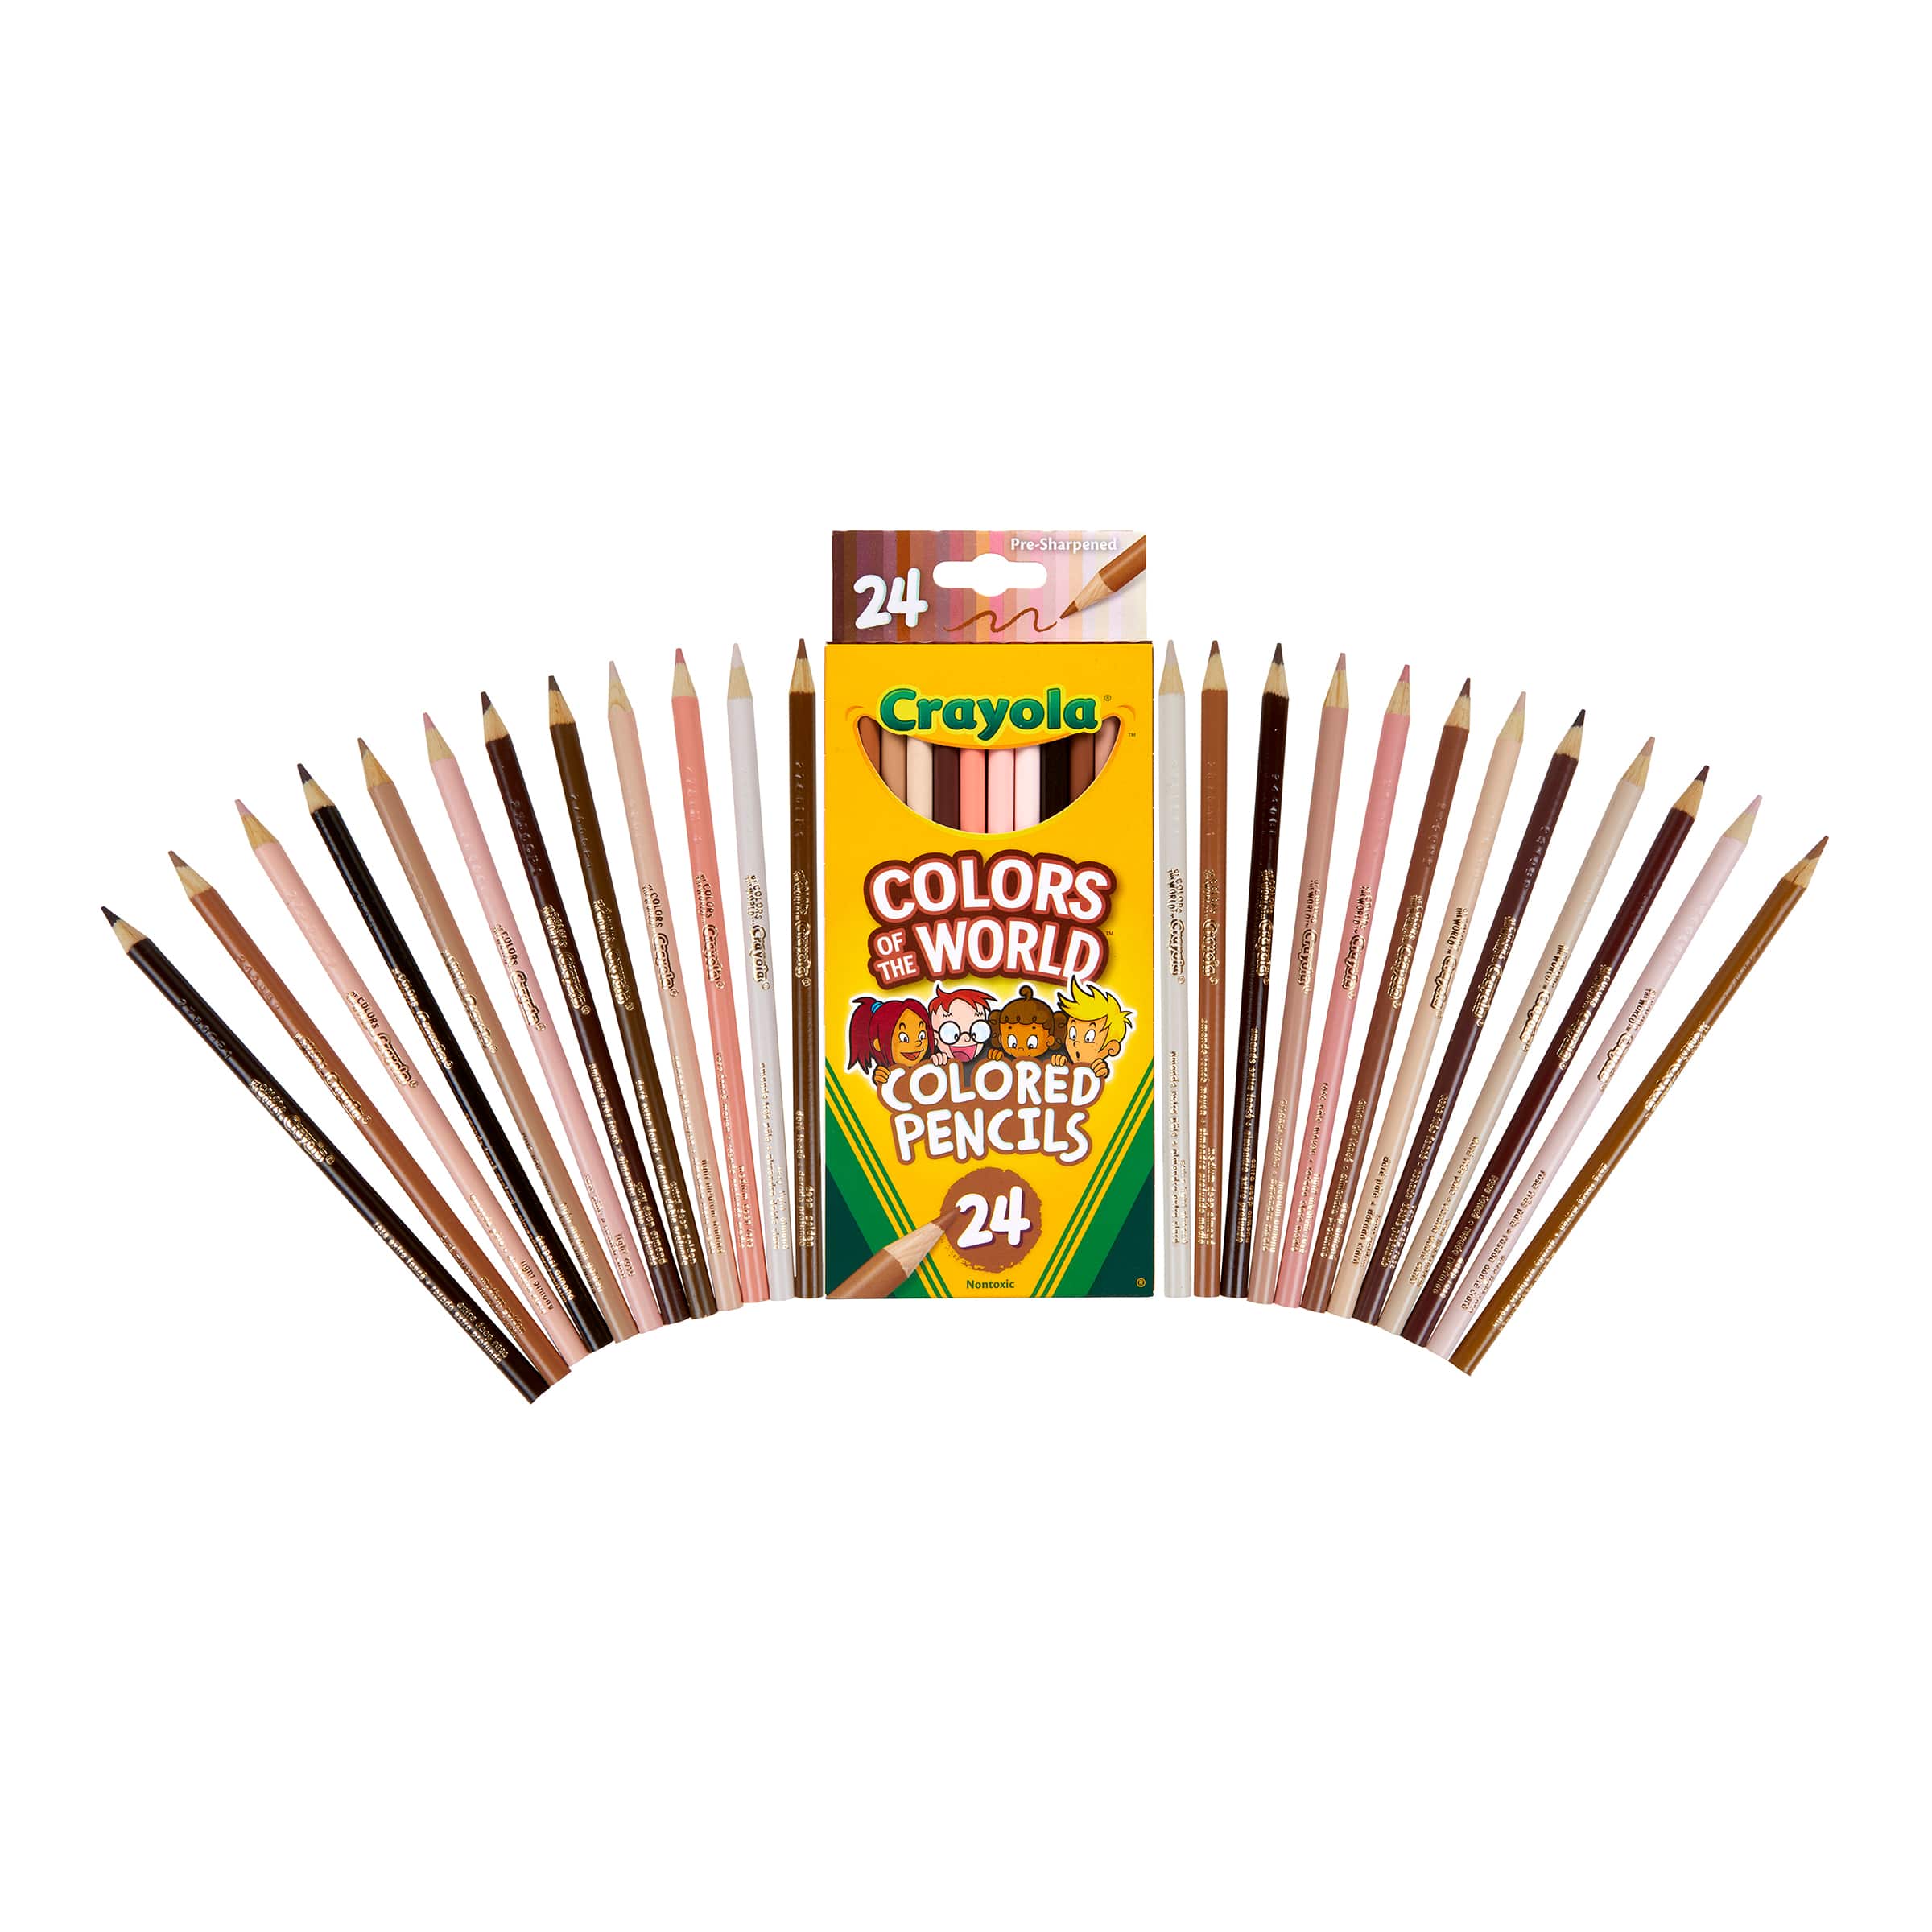 Crayola&#xAE; Colors of the World Colored Pencils, 24ct.